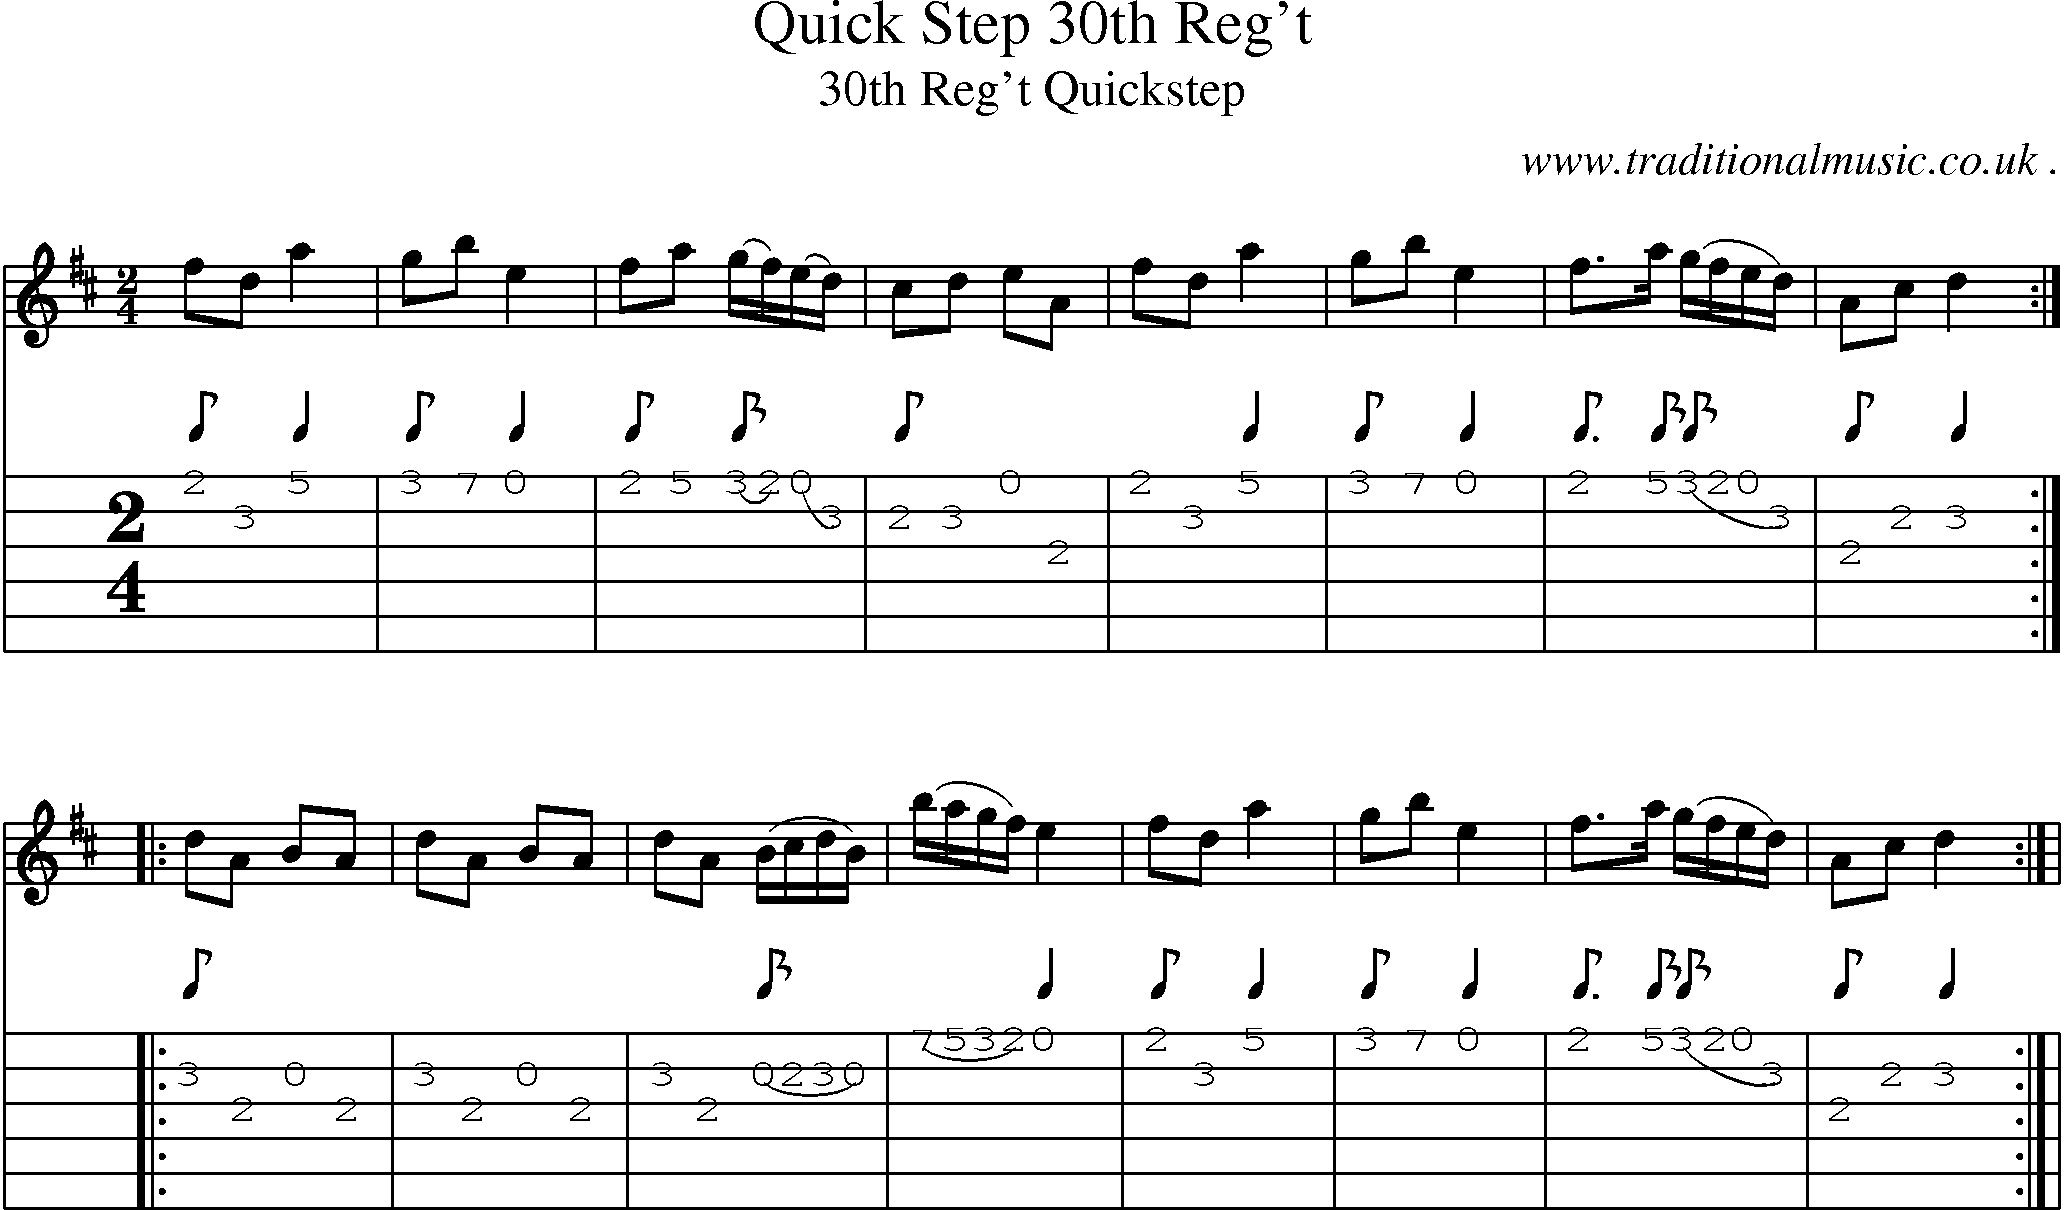 Sheet-Music and Guitar Tabs for Quick Step 30th Reg